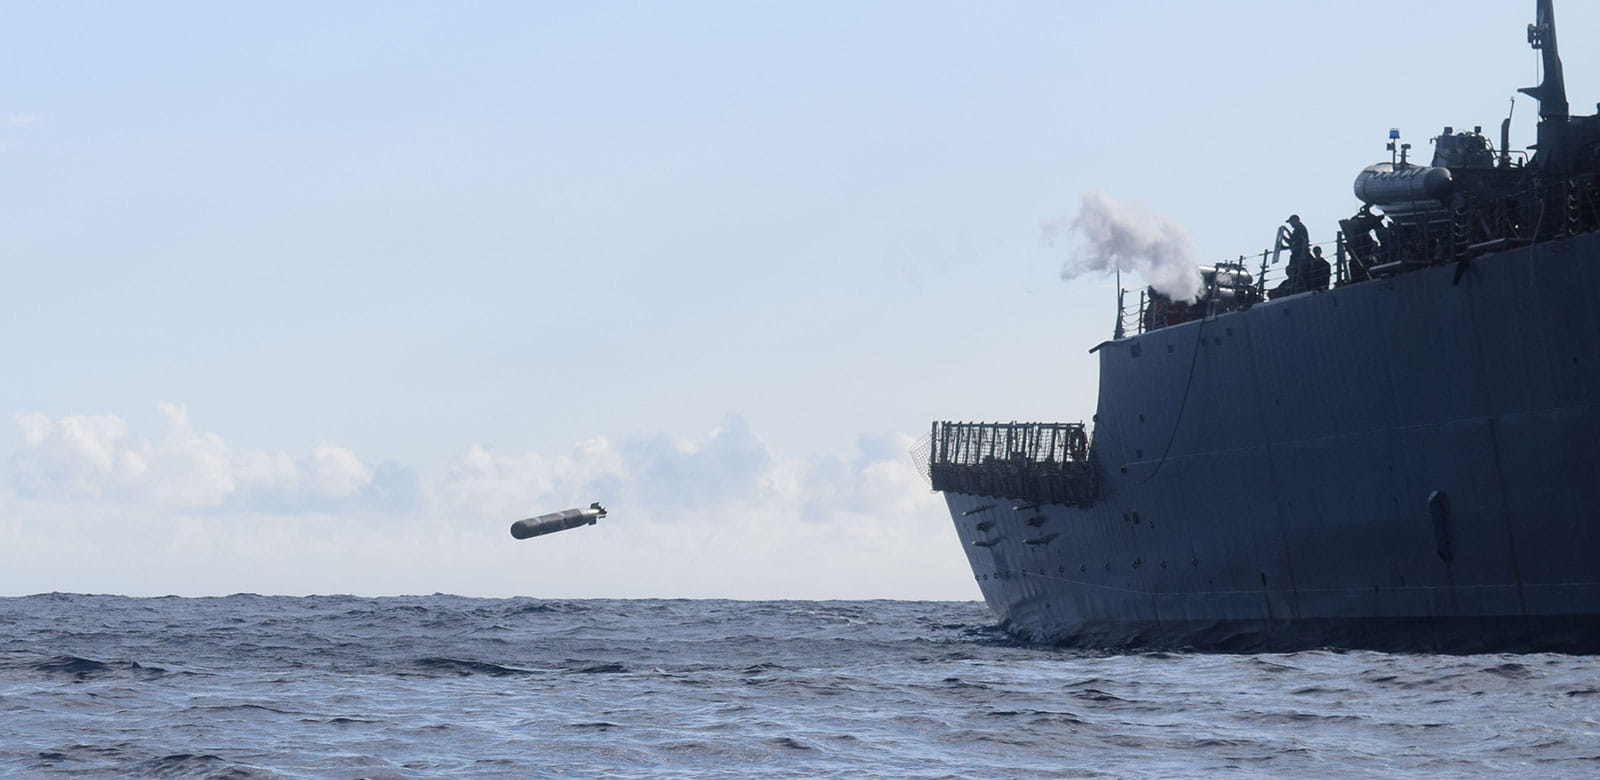 The guided missile destroyer USS O'Kane(DDG 77) fires a Mk54 recoverable exercise torpedo out of the Surface Vessel Torpedo Tube during Combat Systems Ship Qualifications and Trials (U.S. Navy Photo by Yeoman 3rd Class Armand Garcia/Released)